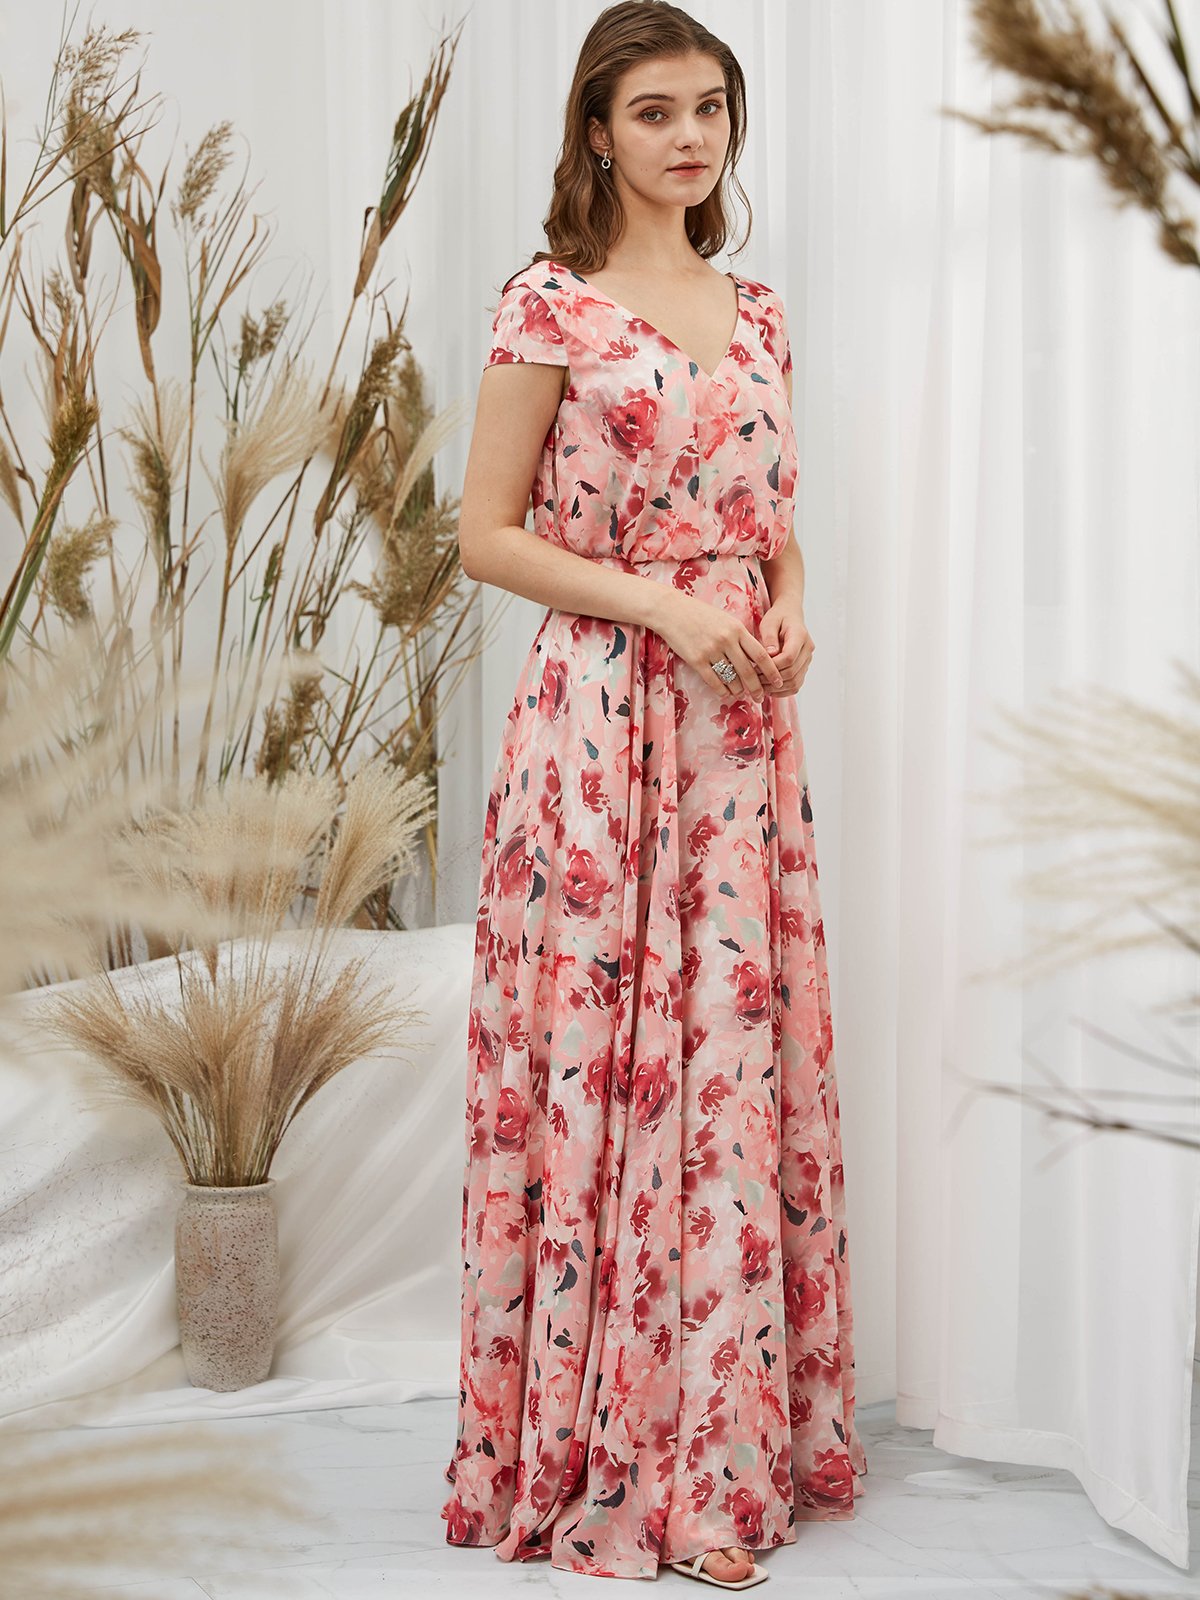 Cap Sleeves Chiffon V Neck Print Floral Red Floor Length Formal Evening Gown